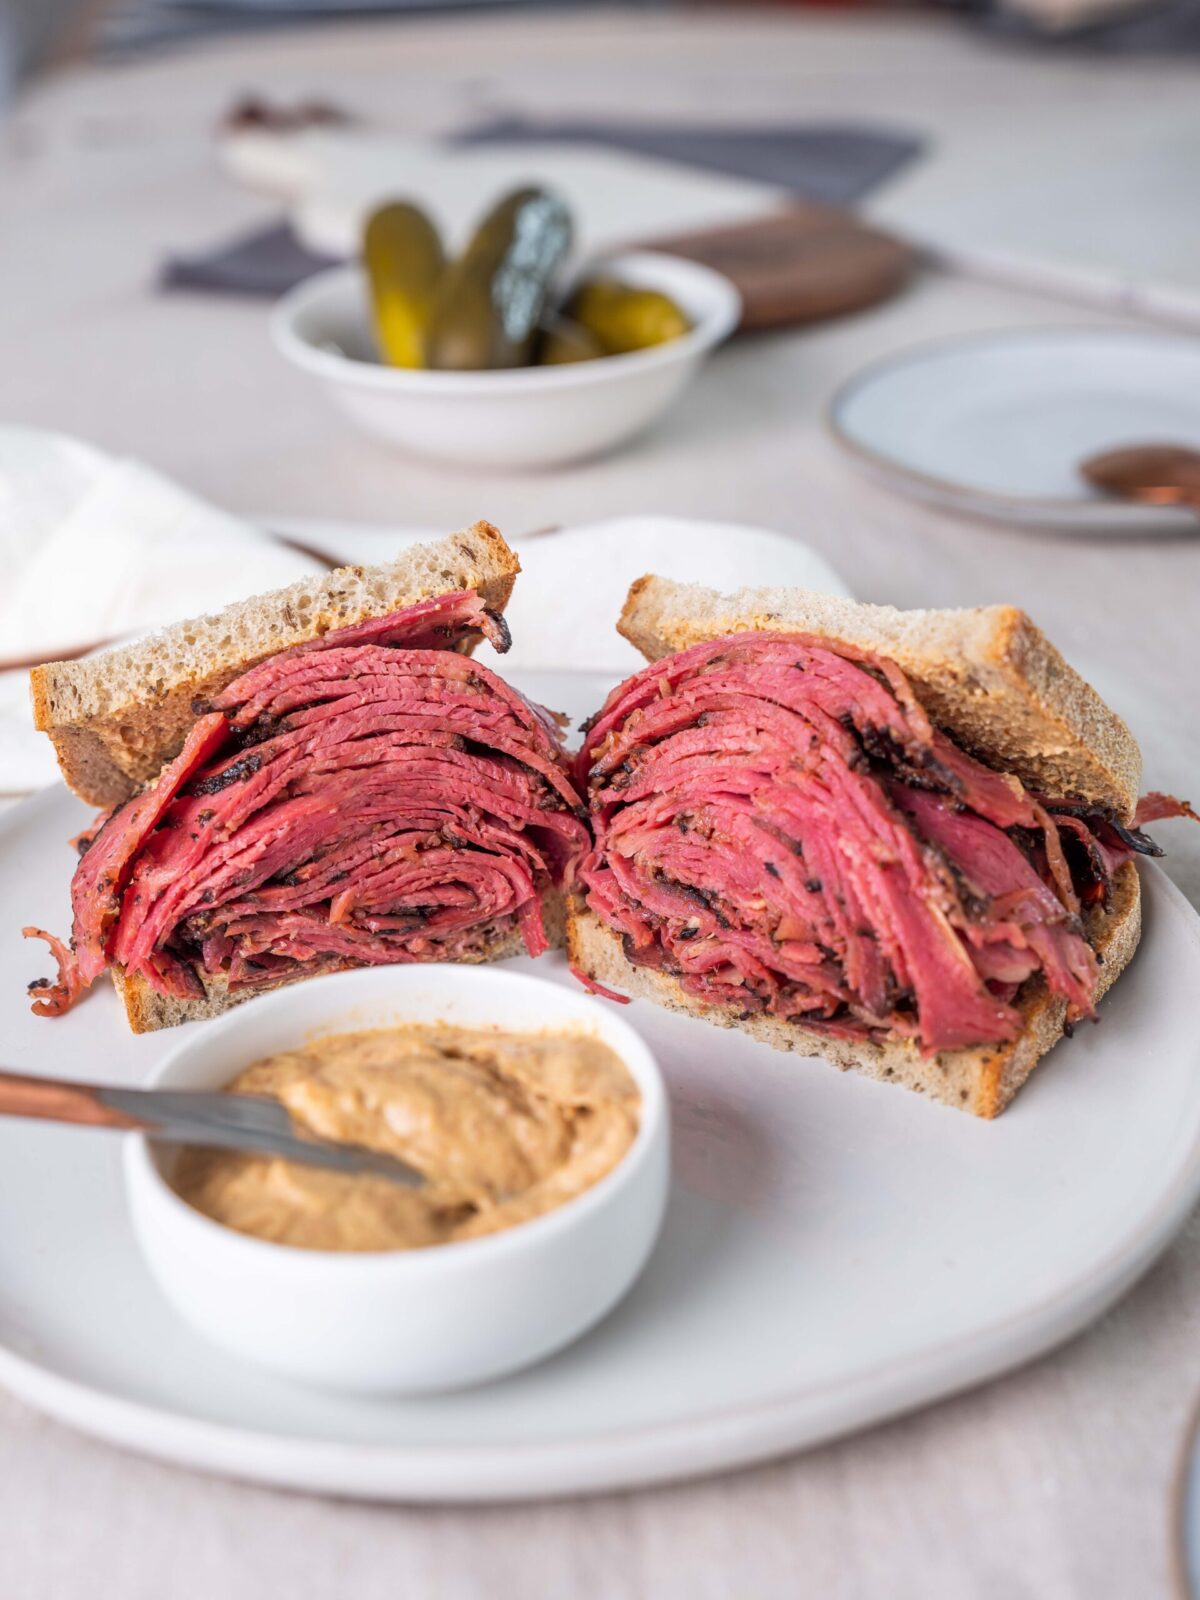 Best Pastrami Online. This is jewish comfort food with NYC foodie love. The beefy juicy pastrami is a NYC classic. Free delivery and perfect gift for holidays. www.ChopHappy.com #pastrami #JewishFood